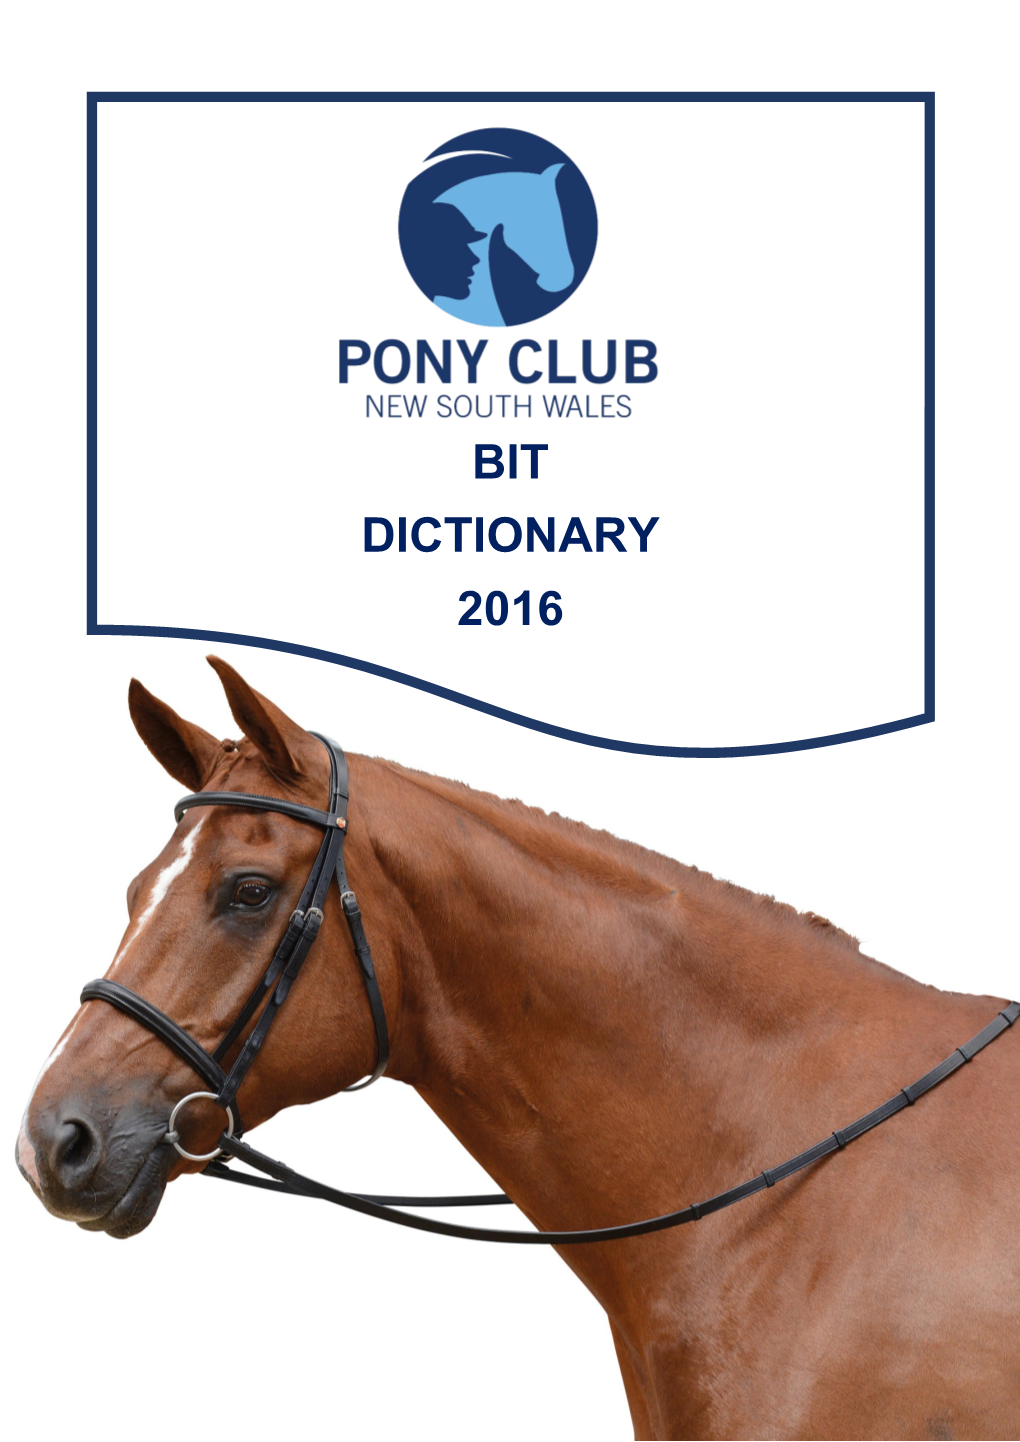 BIT DICTIONARY 2016 the Pony Club Association of New South Wales – Bit Dictionary 2016